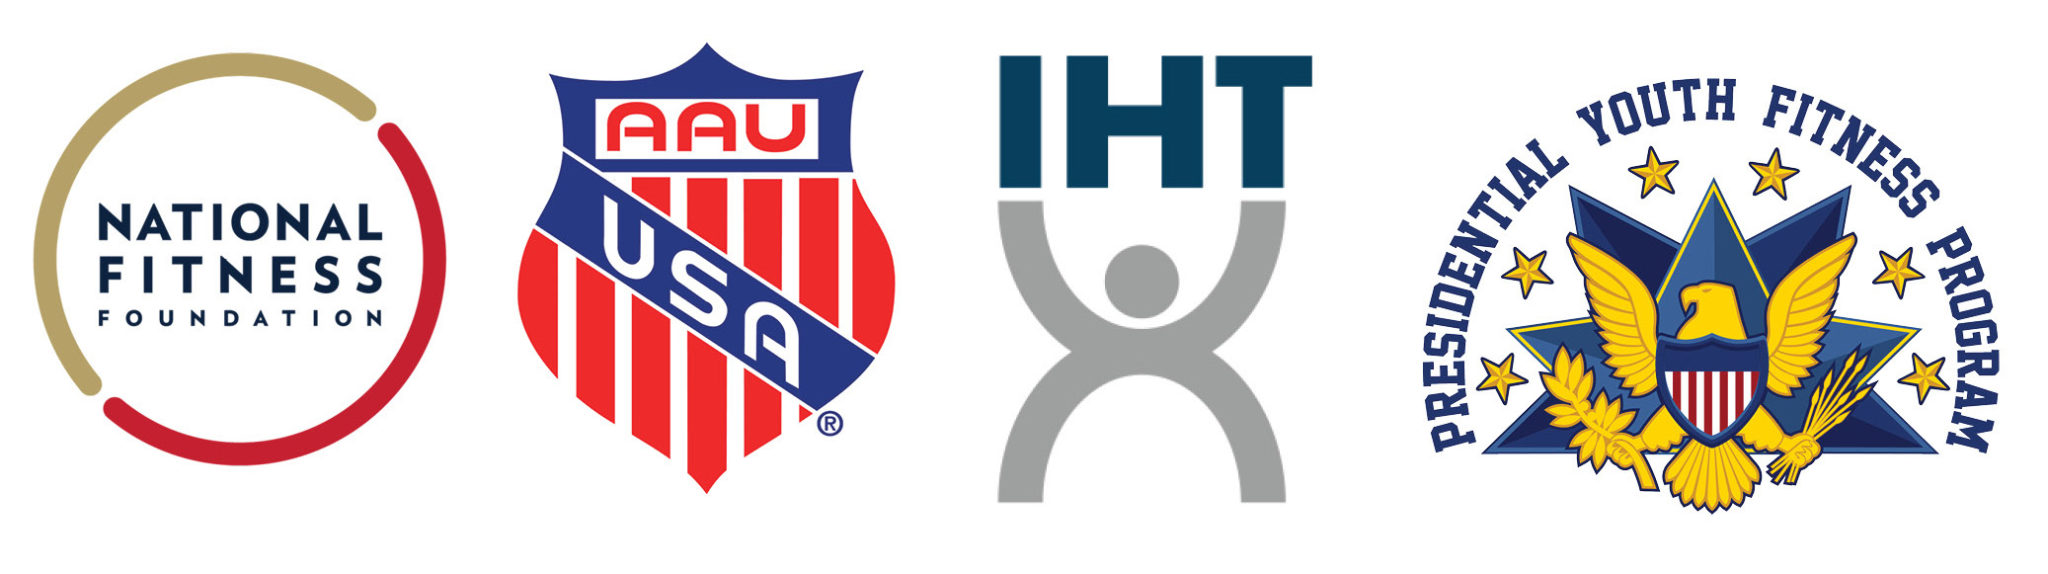 IHT Assessments Selected as Official Software Platform for Presidential Youth Fitness Program